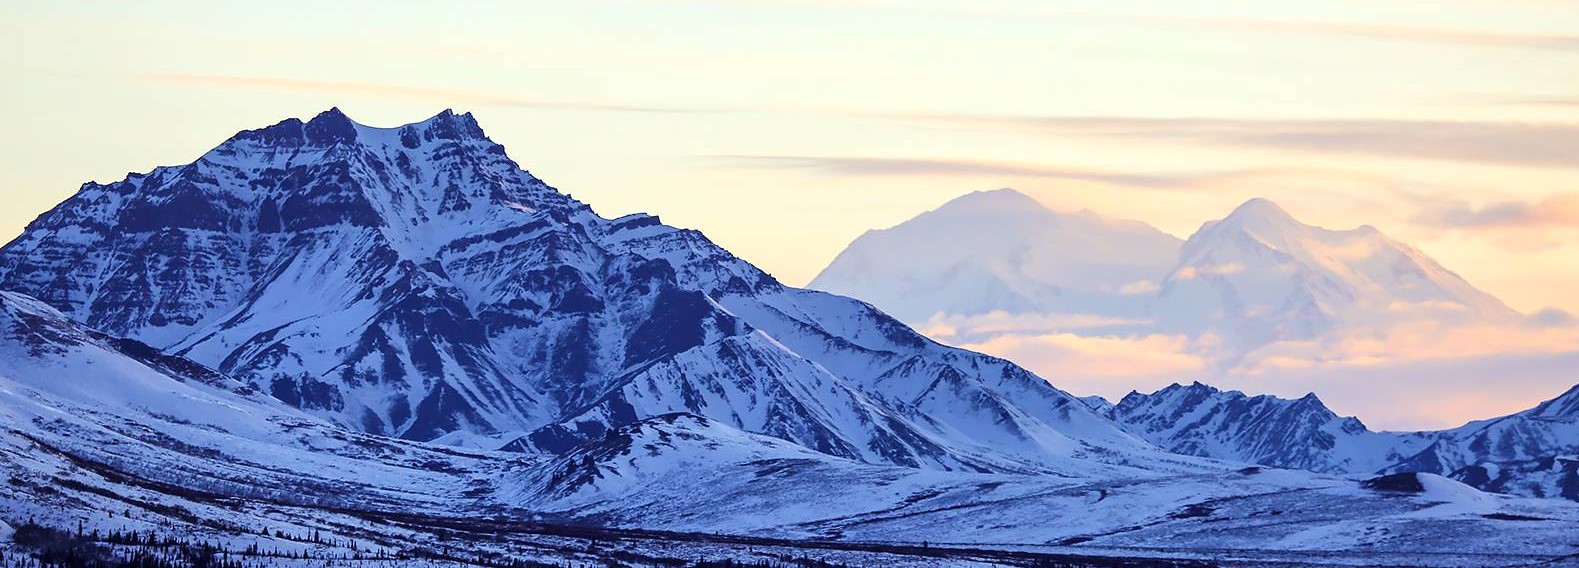 Sunset at Denali showcases purple hues on snow-covered mountains.